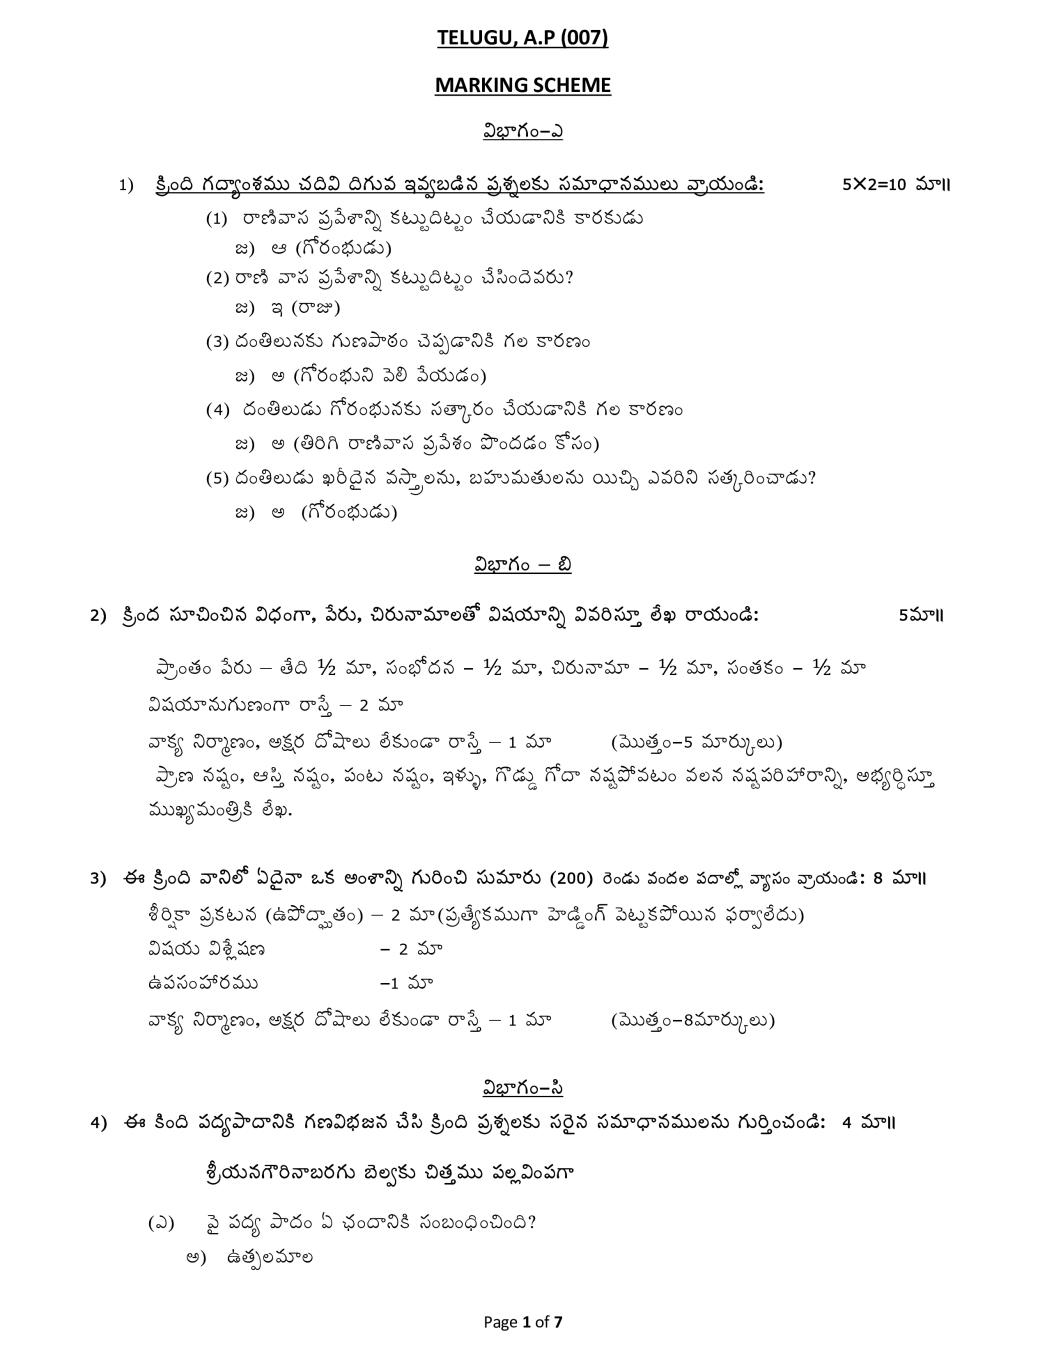 CBSE Class 10 Telugu Question Paper 2019 Solutions - Page 1